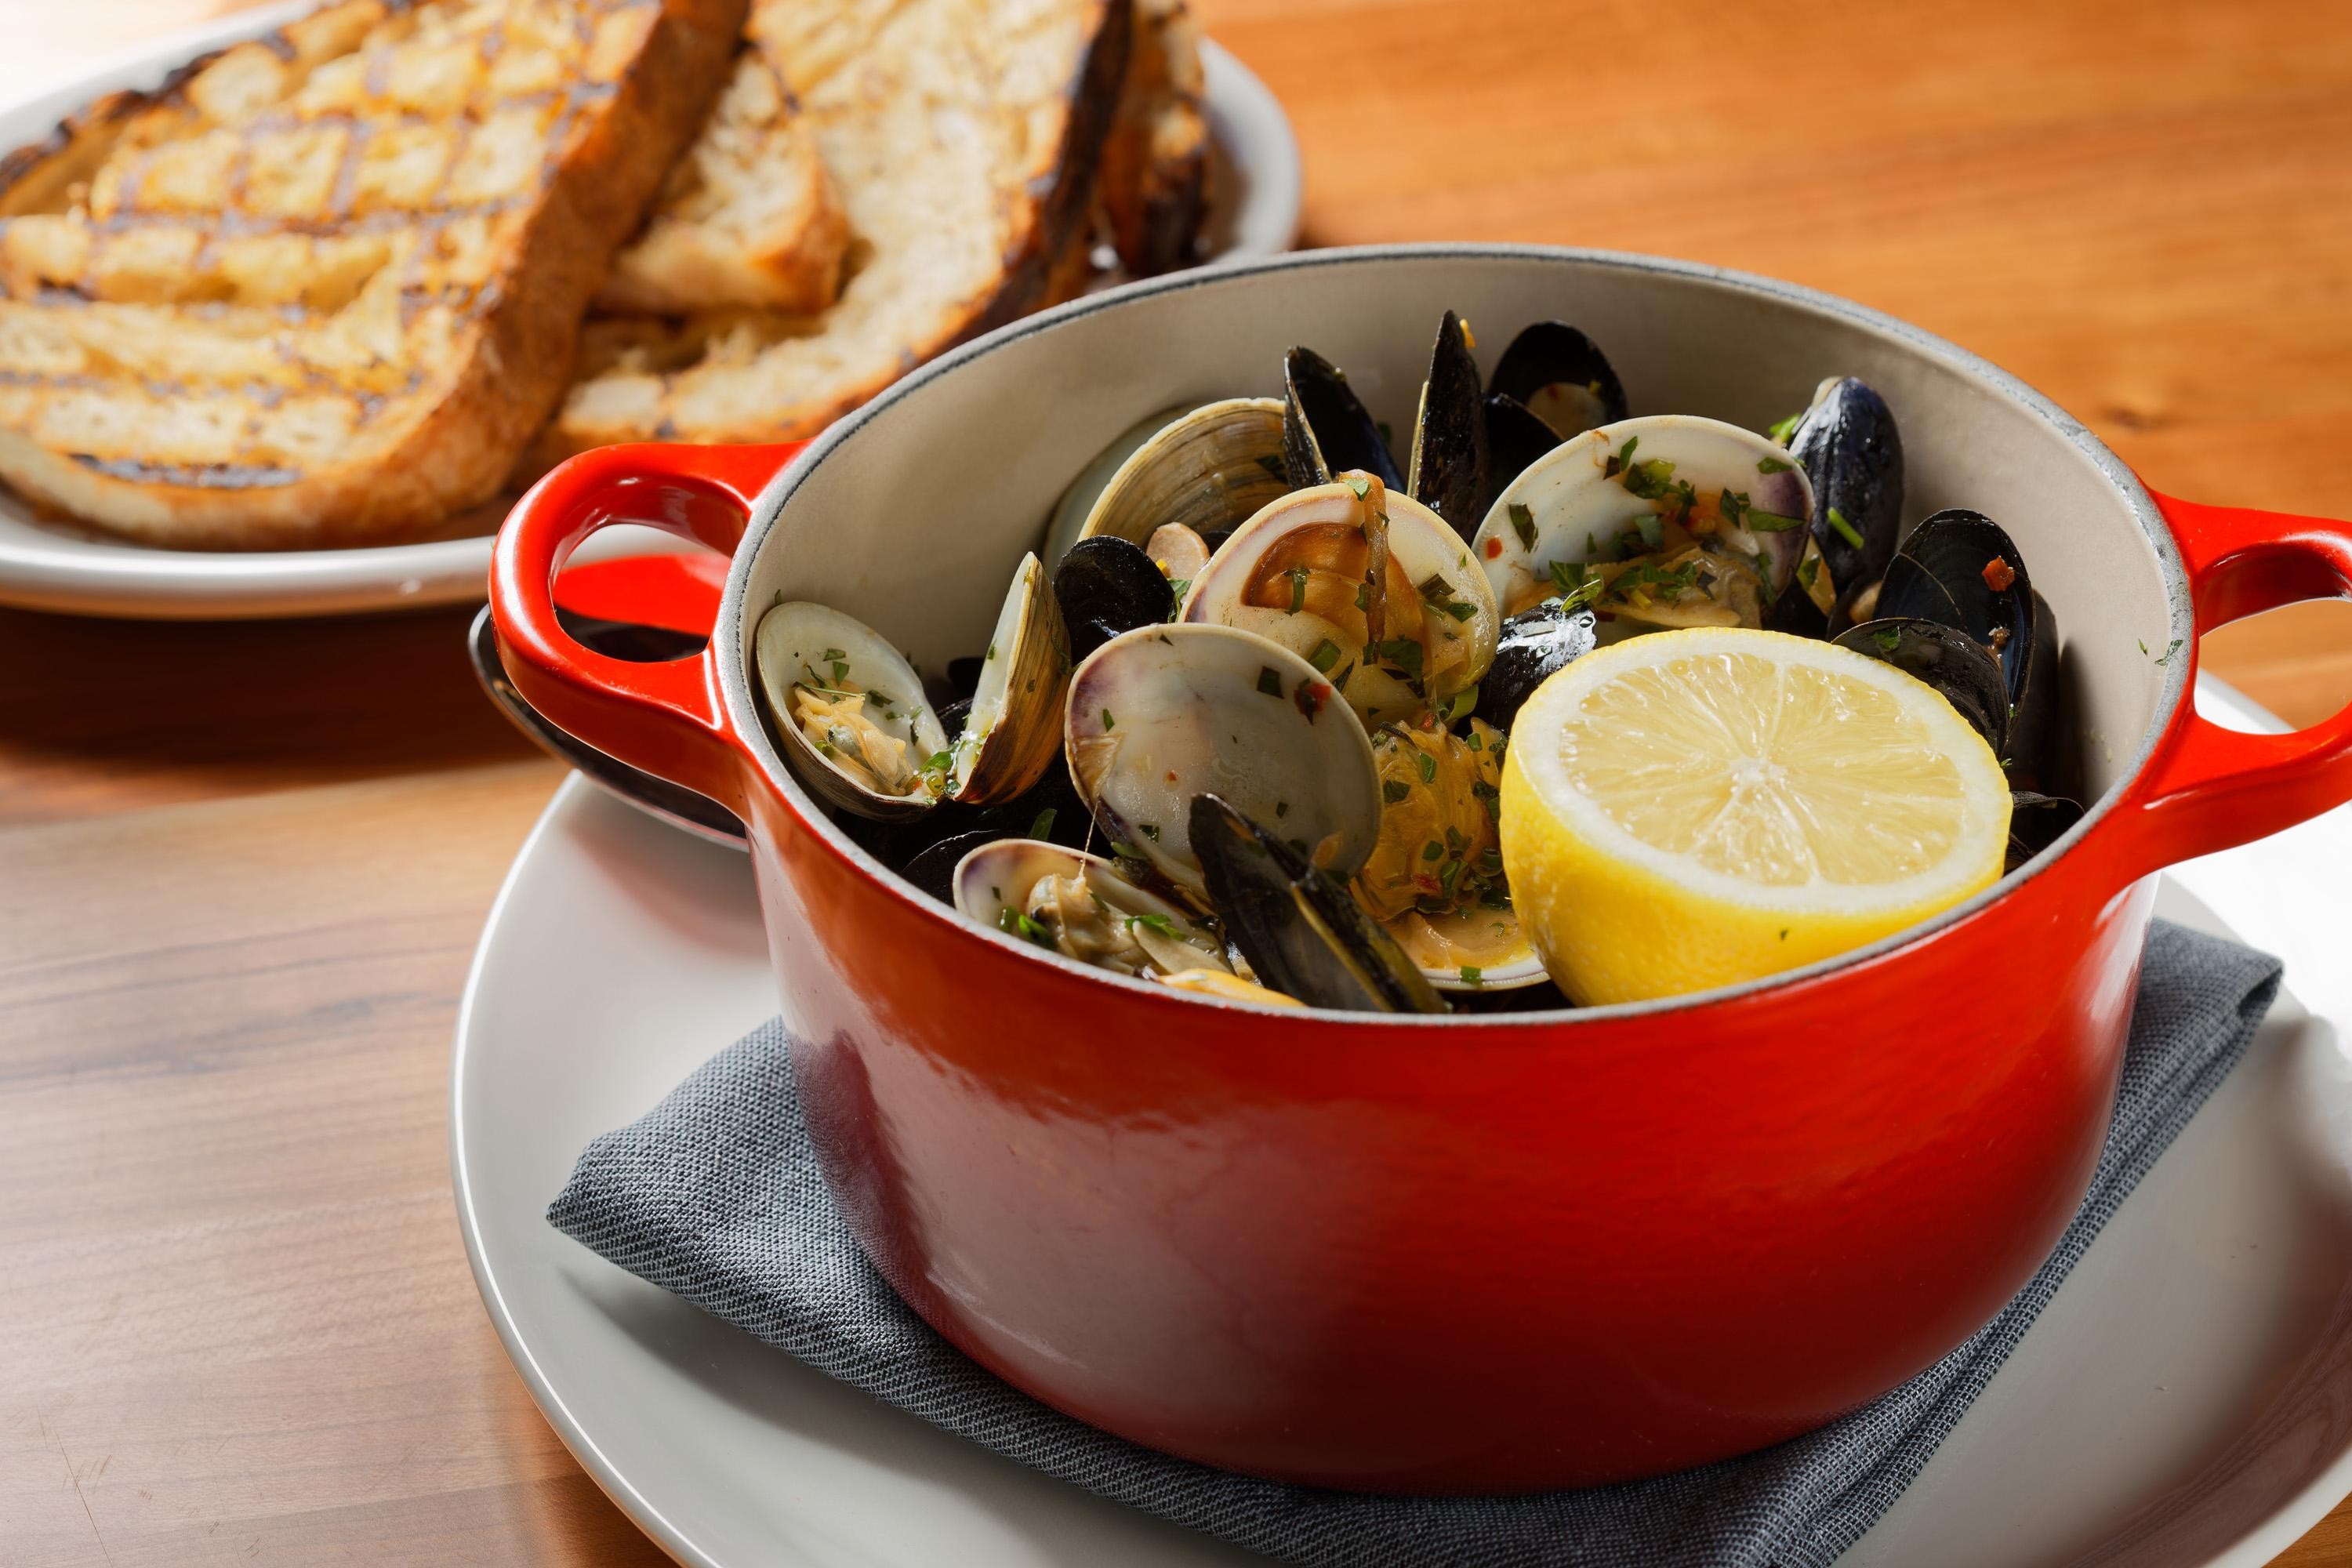 Mussels & Clams